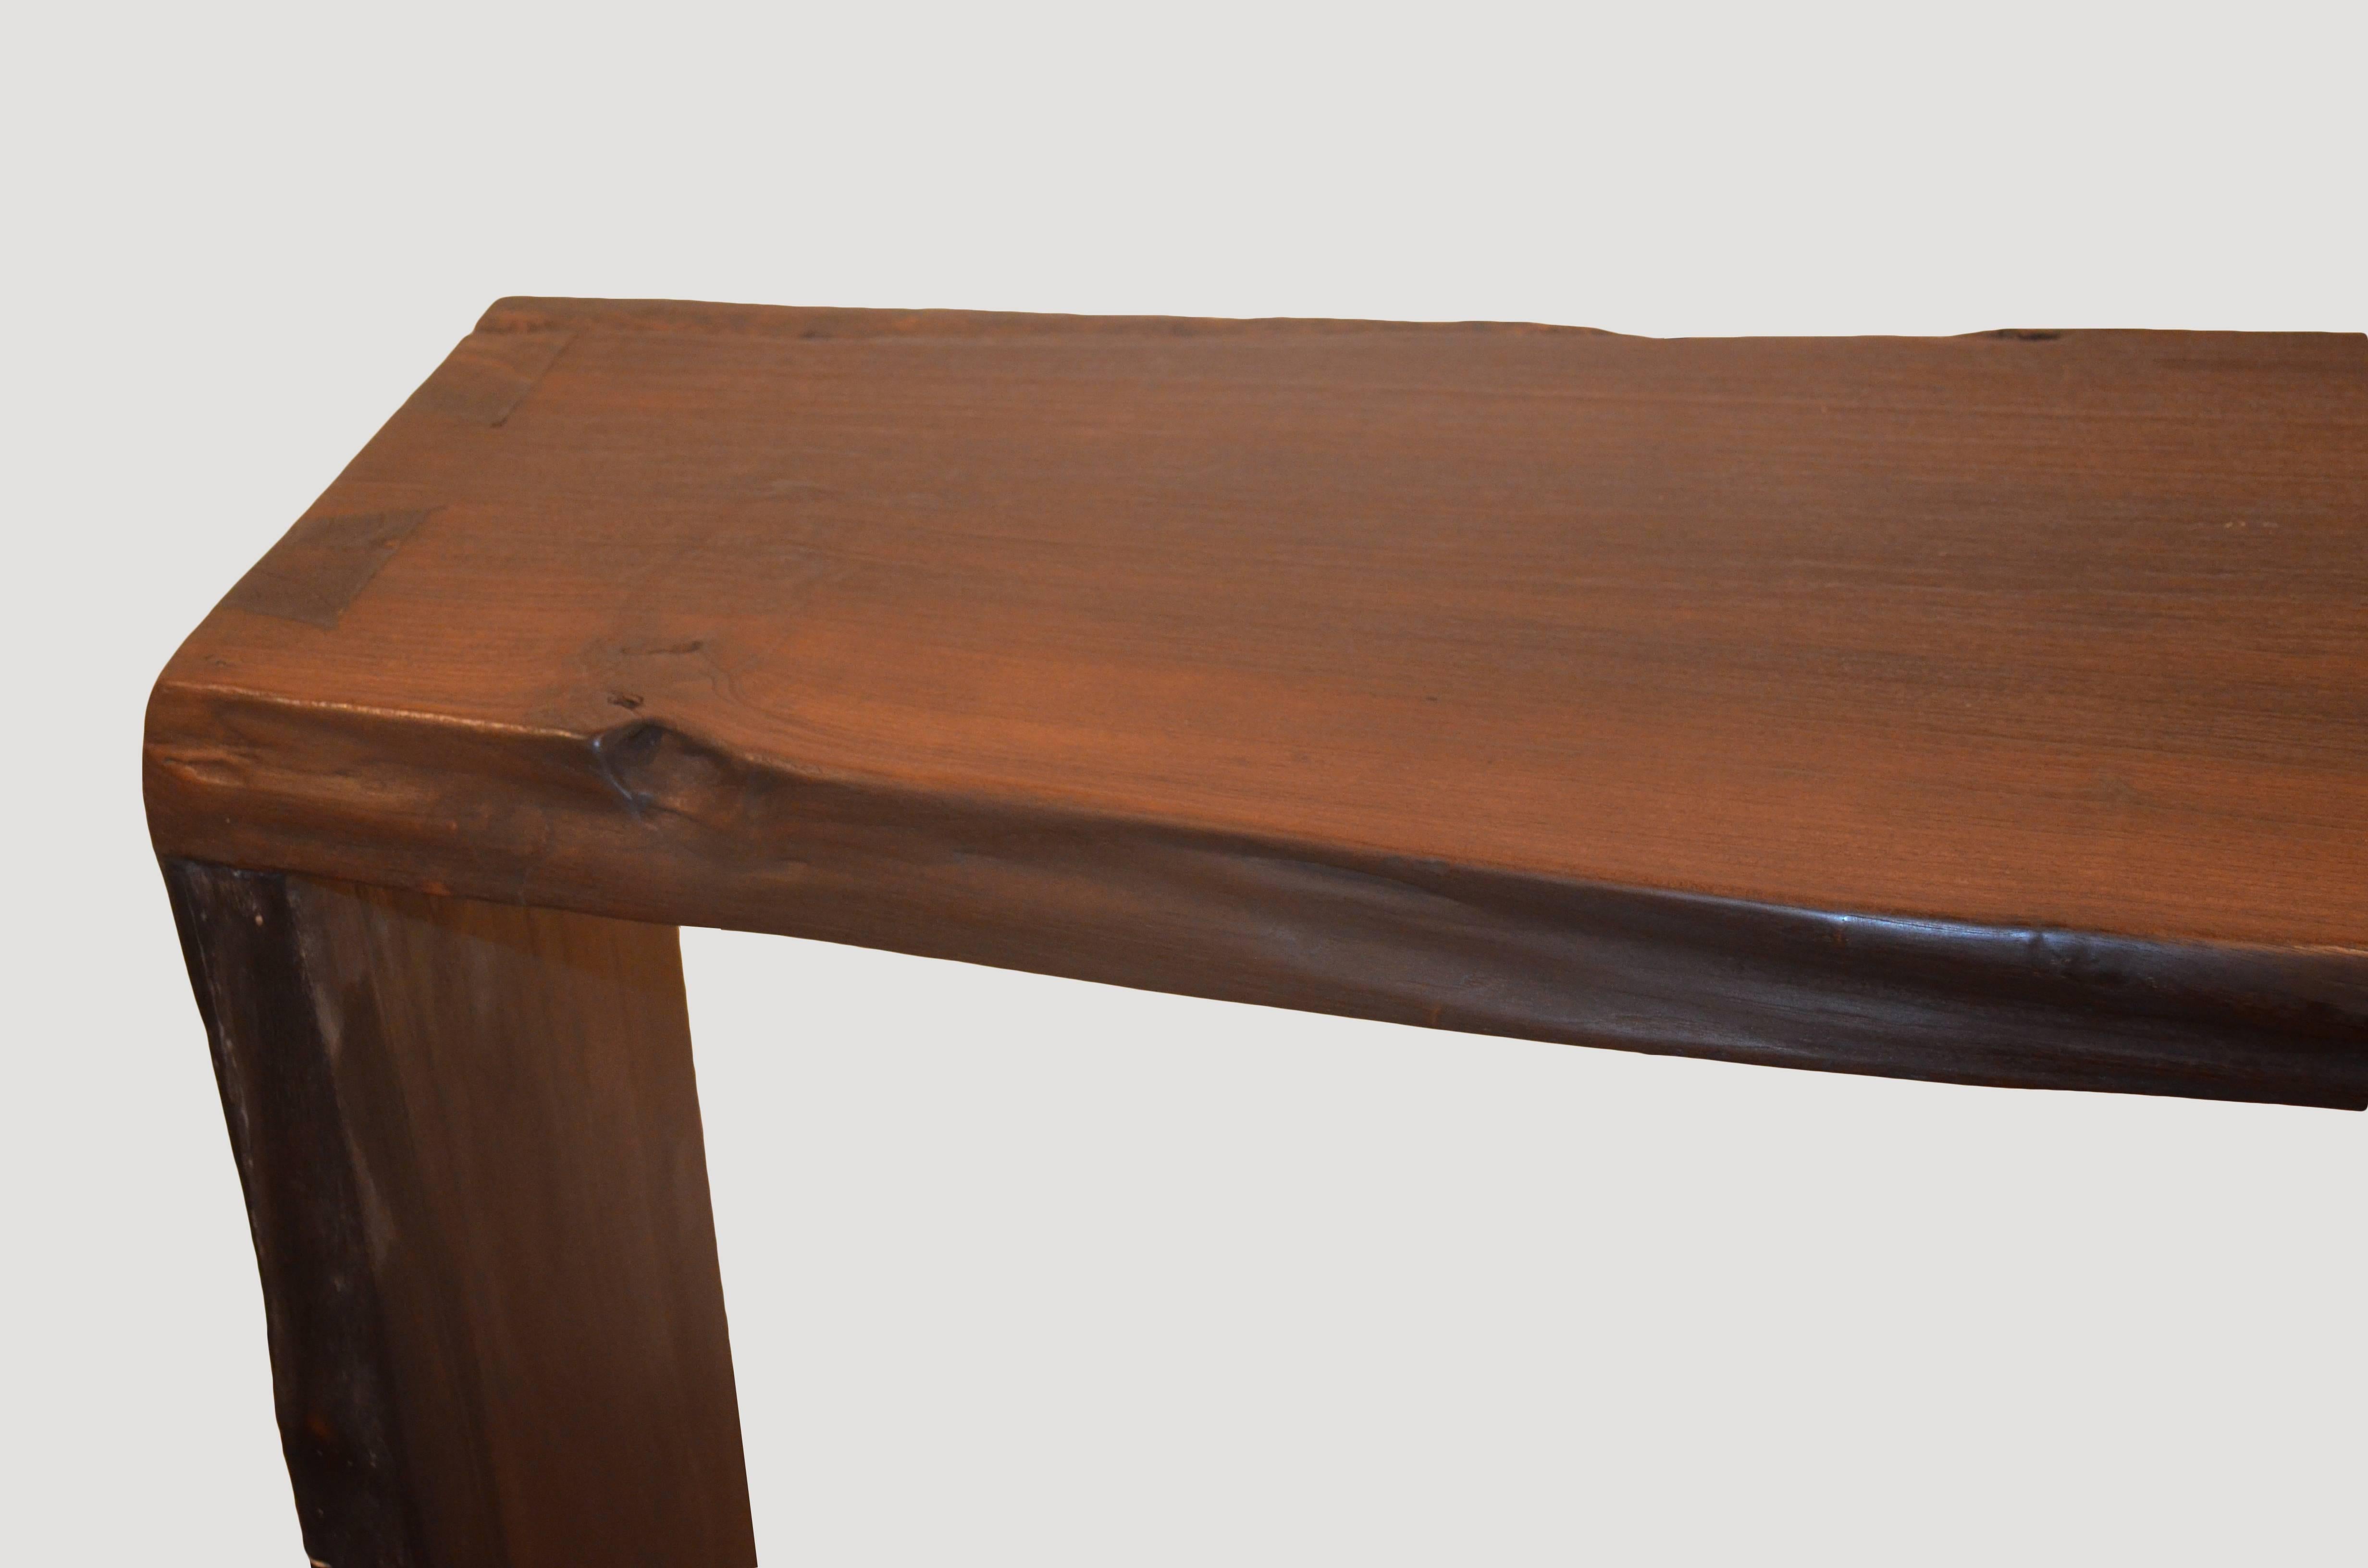 Andrianna Shamaris Single Burnt Teak Wood Console In Excellent Condition For Sale In New York, NY